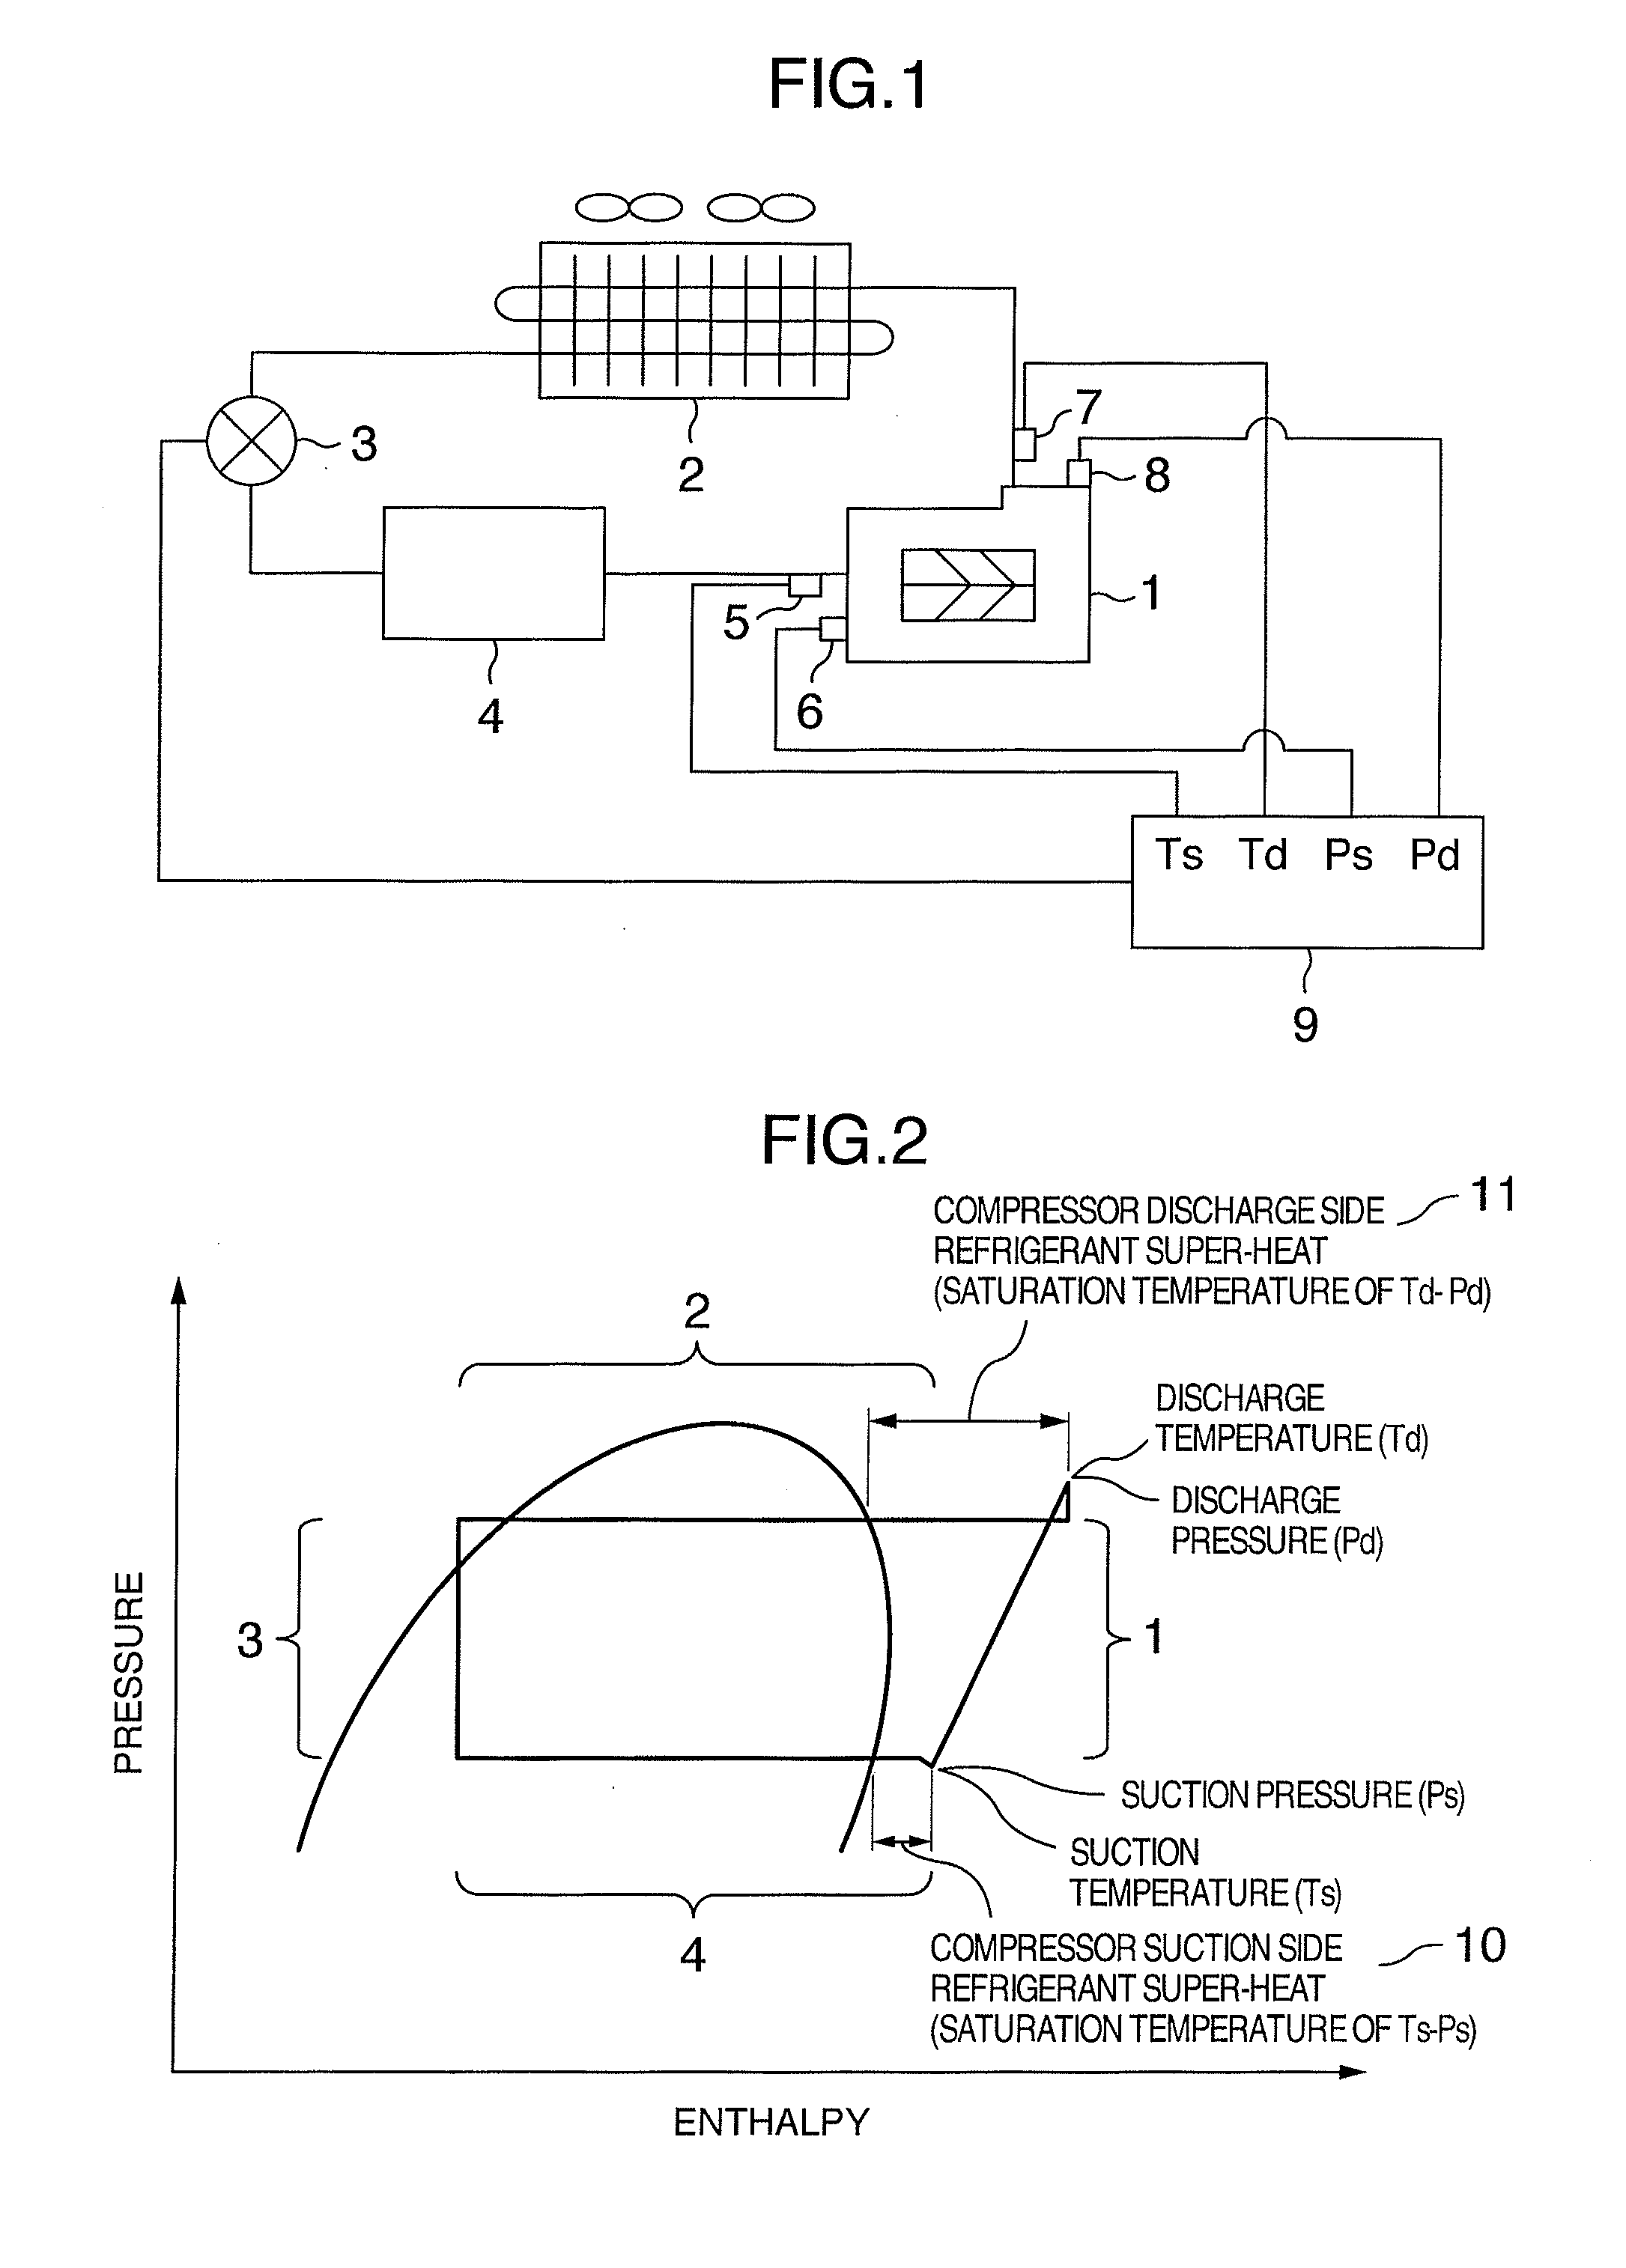 Heat source apparatus and method of starting the apparatus